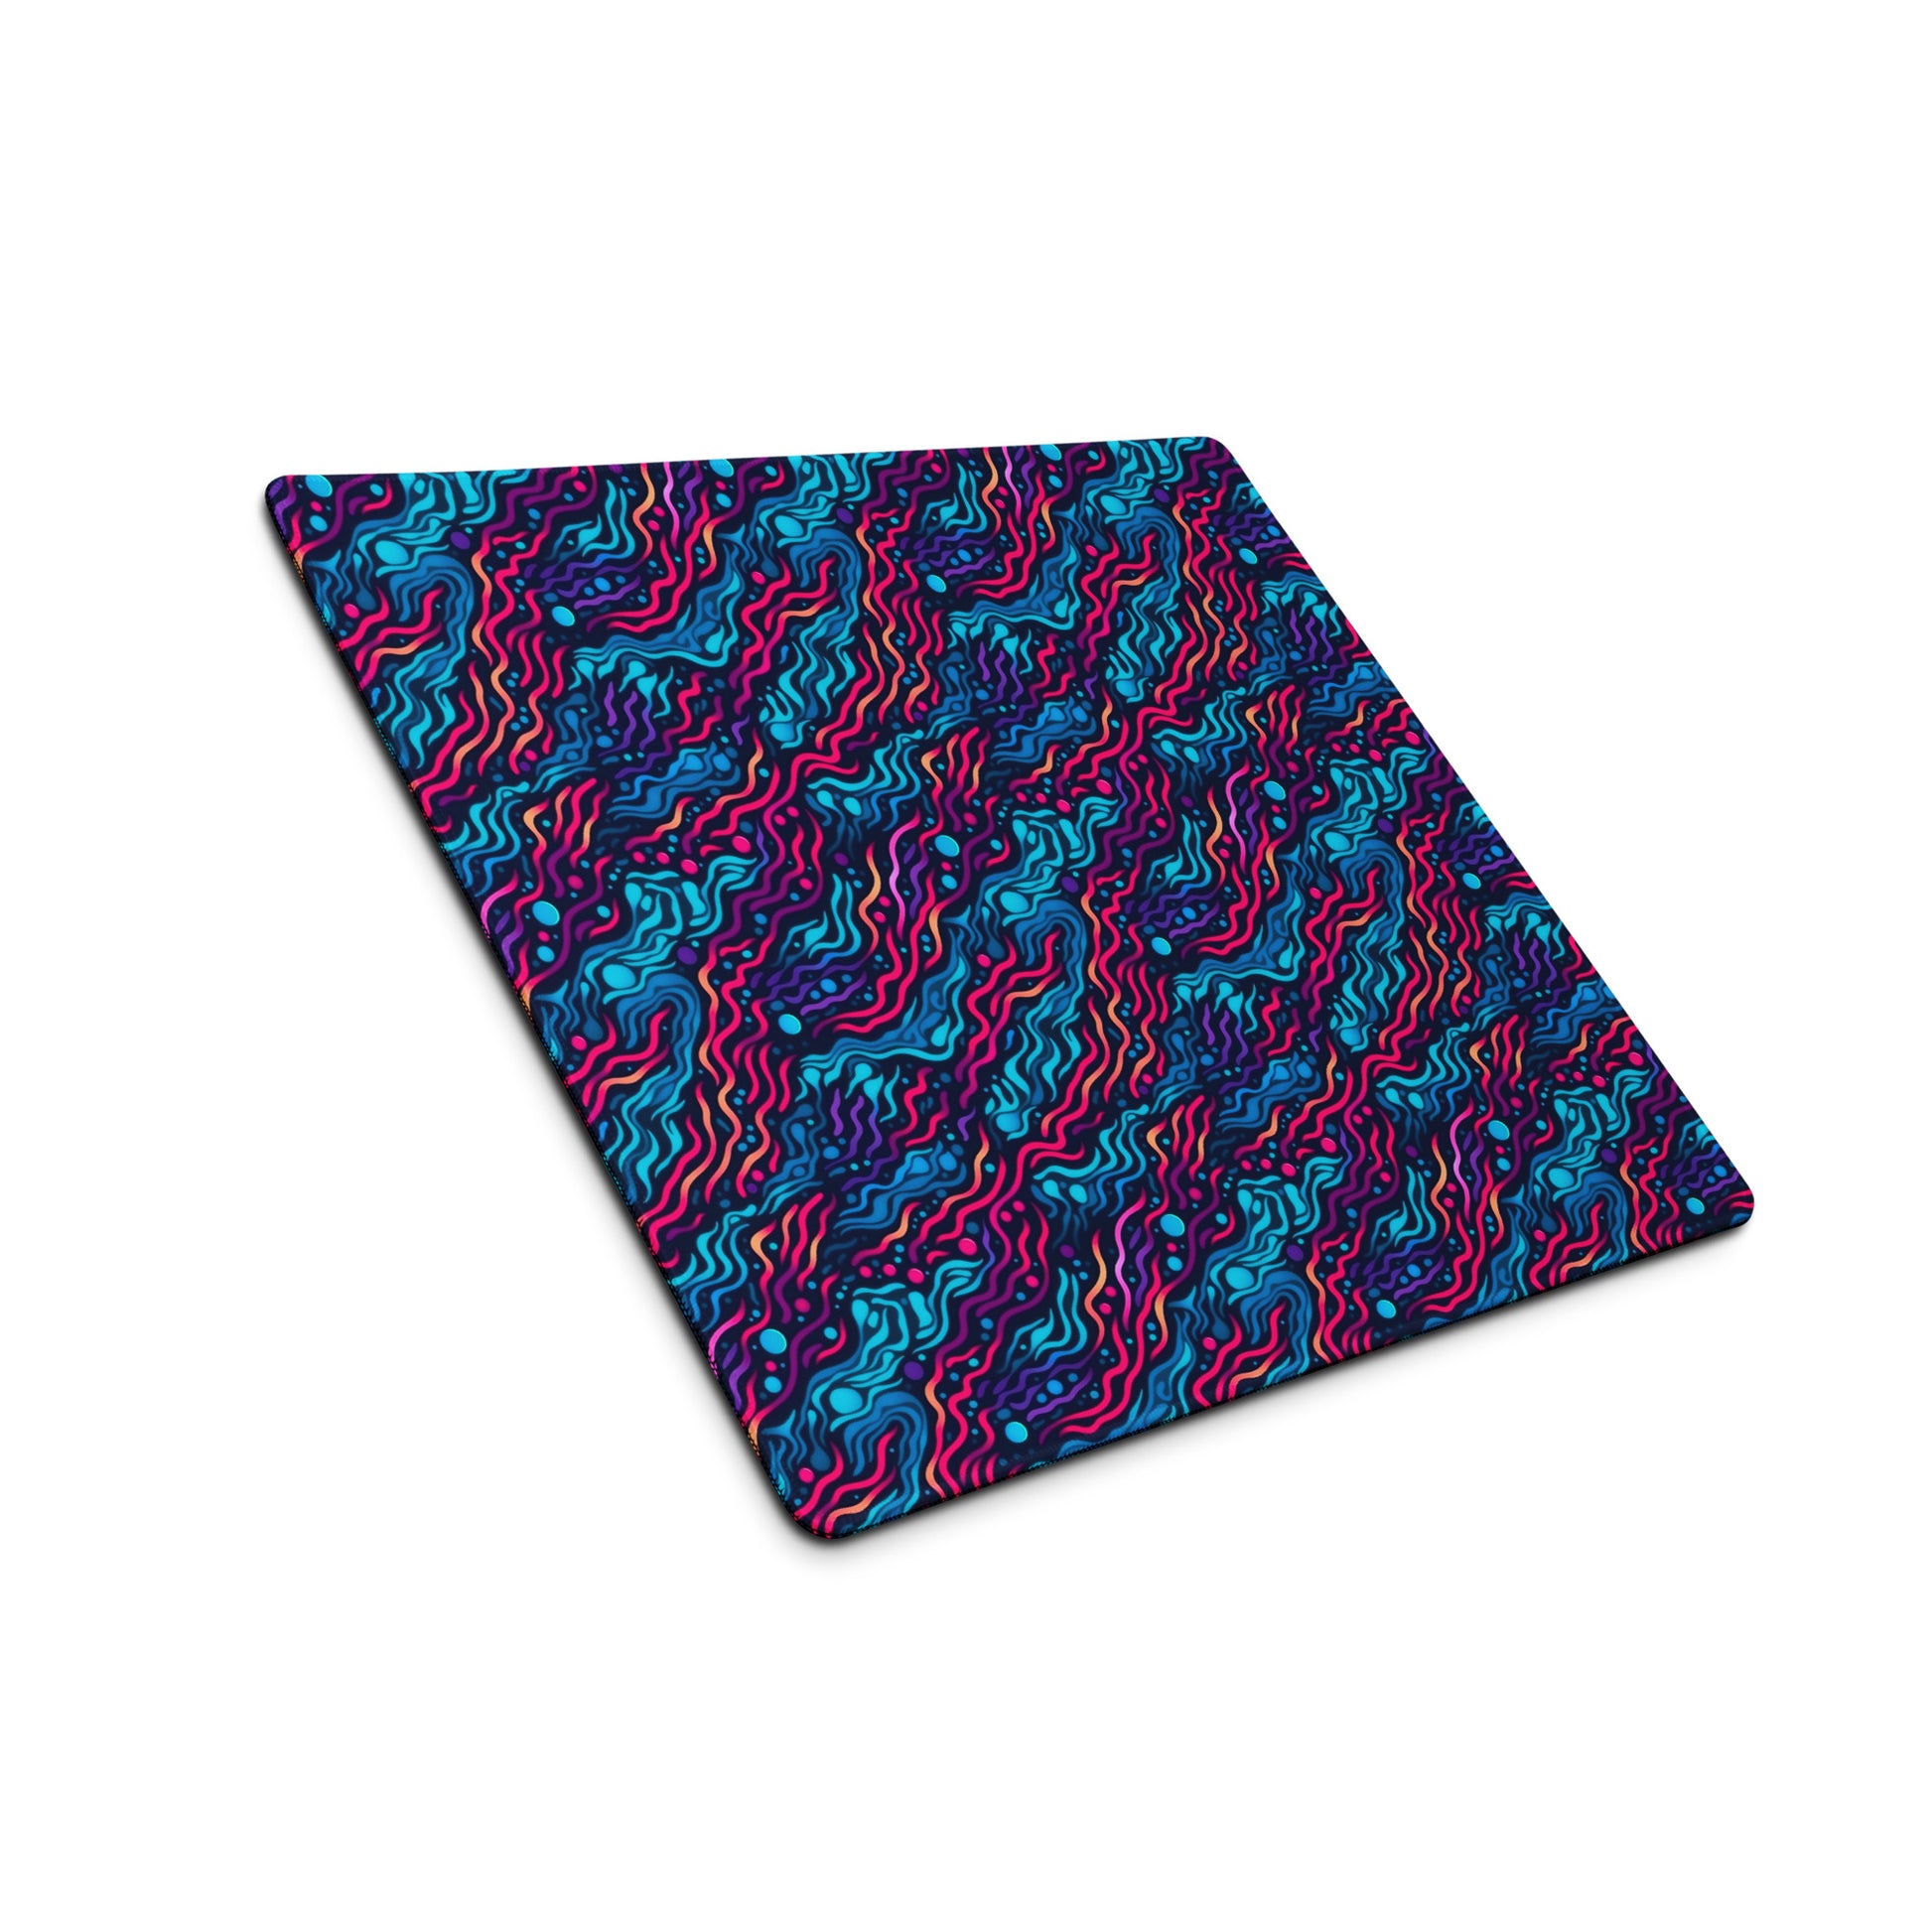 A 18" x 16" desk pad with wavy blue and pink pattern sitting at an angle.